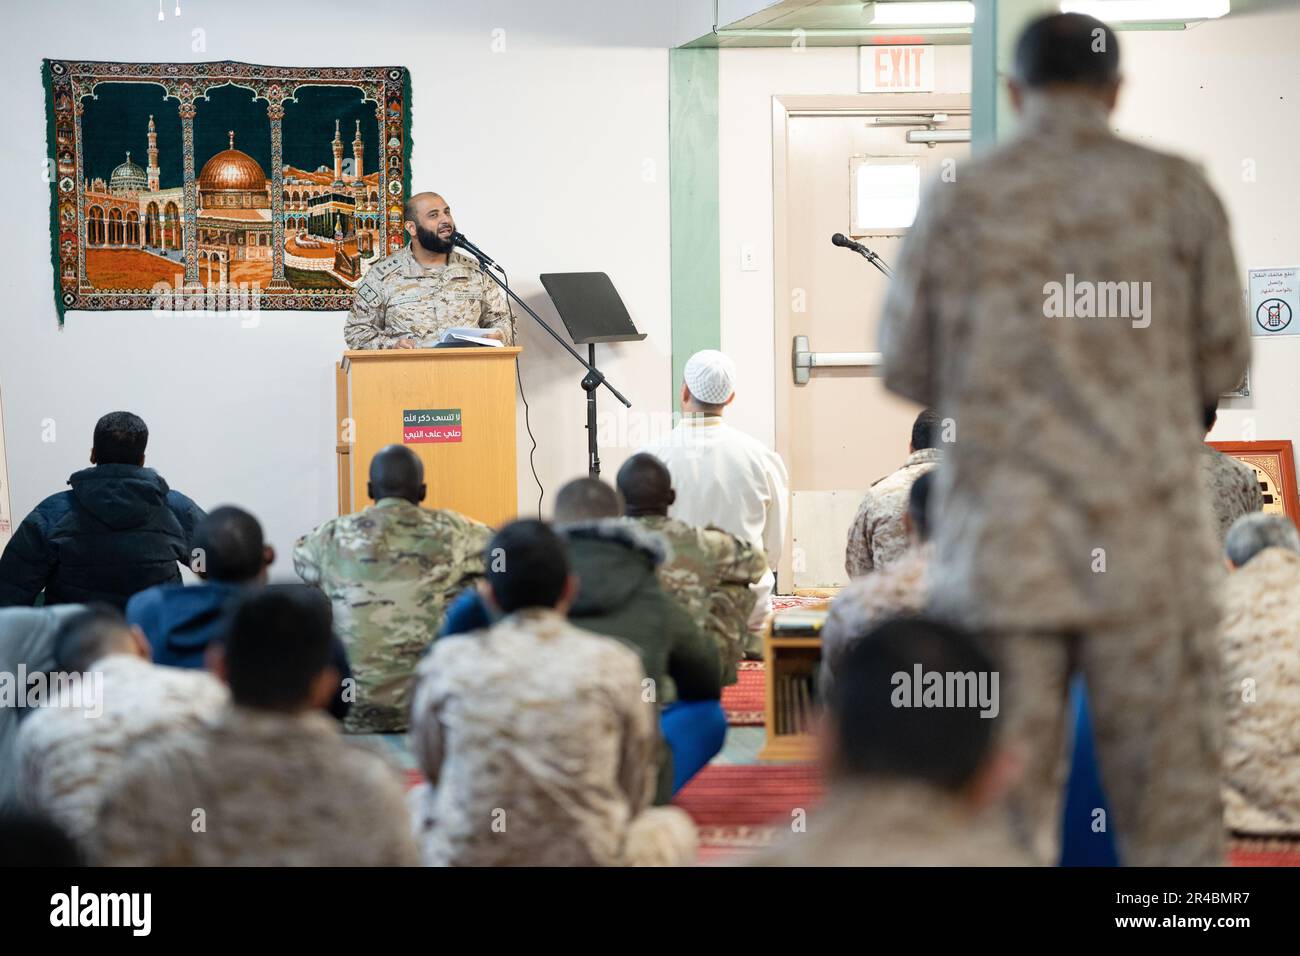 Saudi Royal Air Force Col. Khaled Husaan, delivers the Khutbah, or sermon, in Arabic during the Friday noon religious service, Jum’ah, April 7, 2023 at the Interfaith Chapel on Joint Base San Antonio-Lackland. The month between 22 March - 21 April 2023 coincides with the month of Ramadan on the Islamic calendar. During this month, faithful Muslims fast during the day and eat in the evening during the “Iftar” at sunset. The U.S. Air Force Chaplain Corps provides for the spiritual needs of all servicemen and mission partners training at JBSA, no matter their faith tradition. Stock Photo